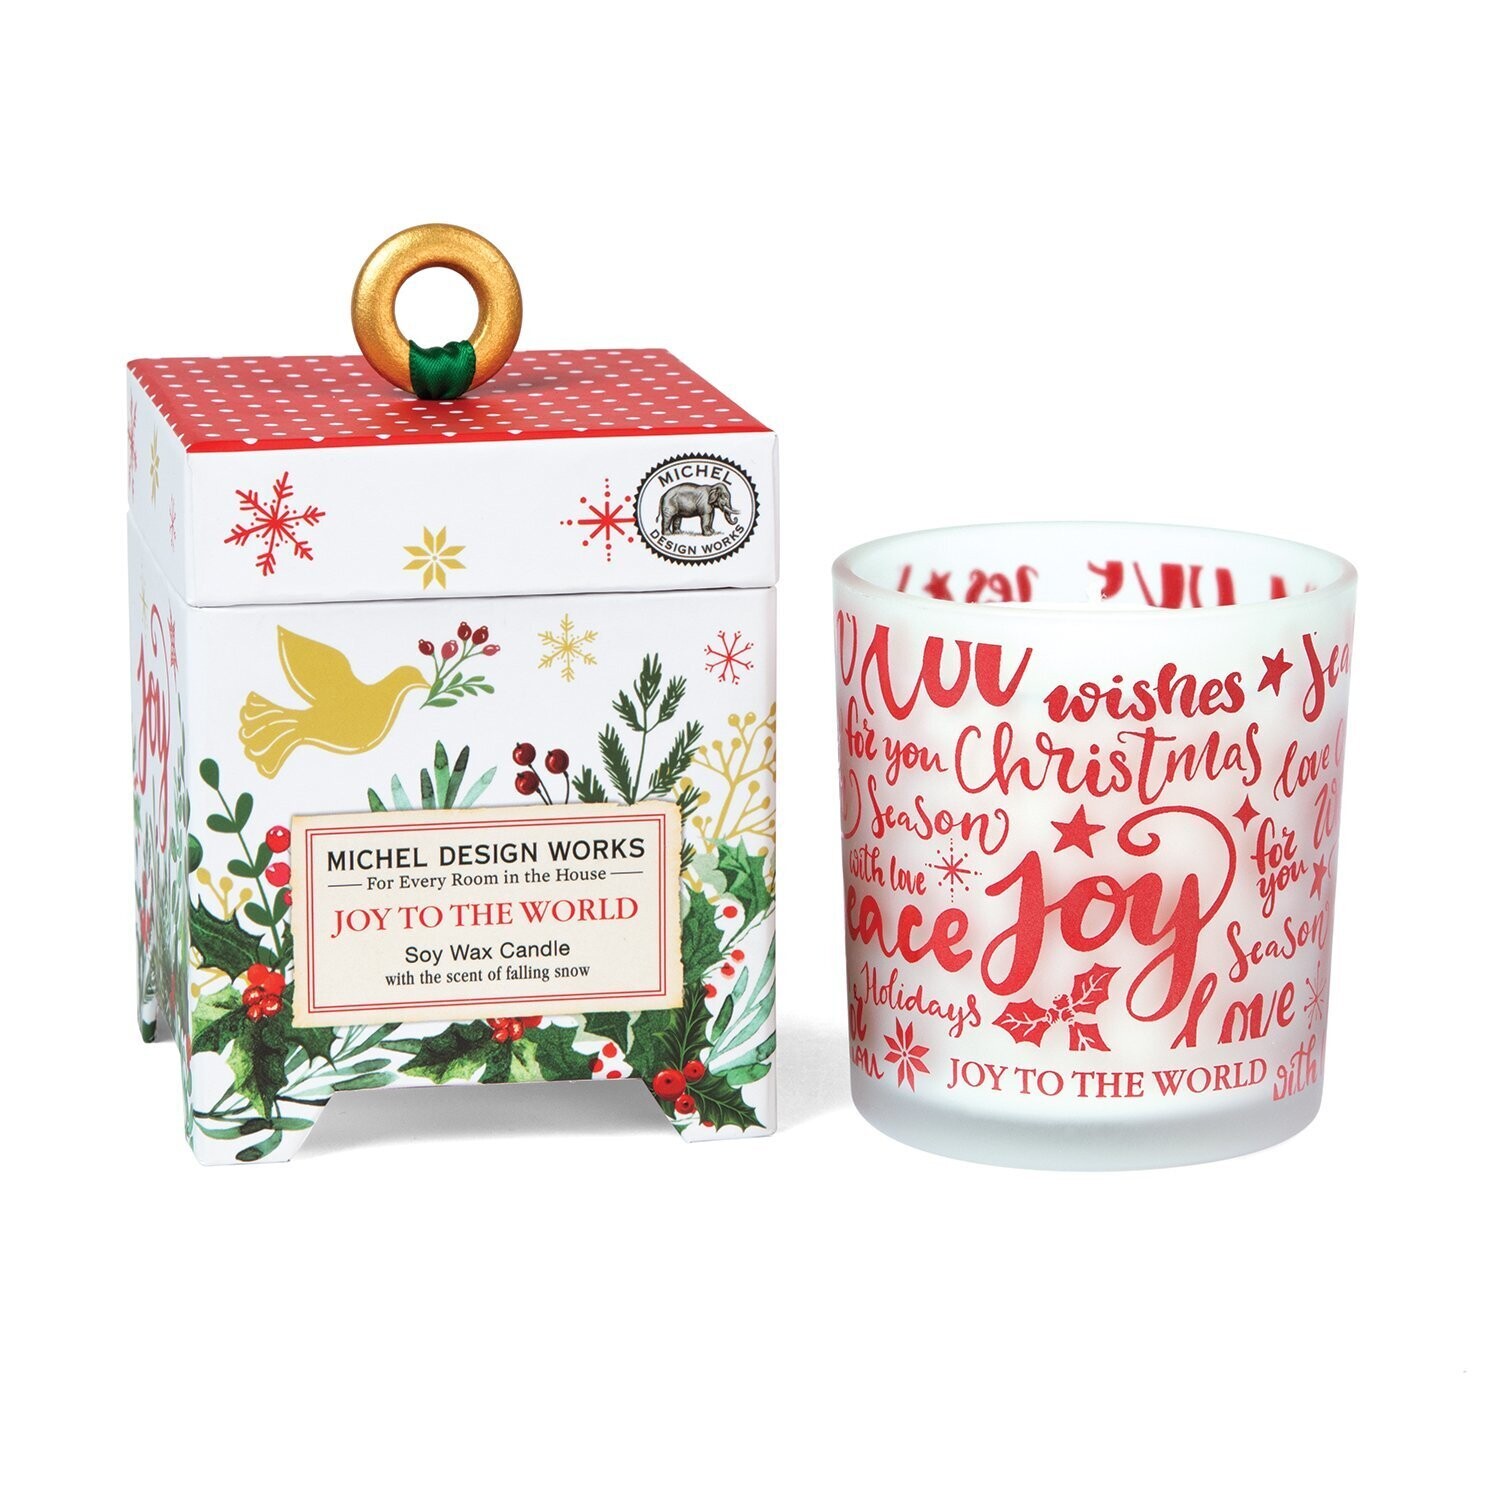 FINAL SALE - Joy To The World - 6.5 Oz. Soy Wax Candle